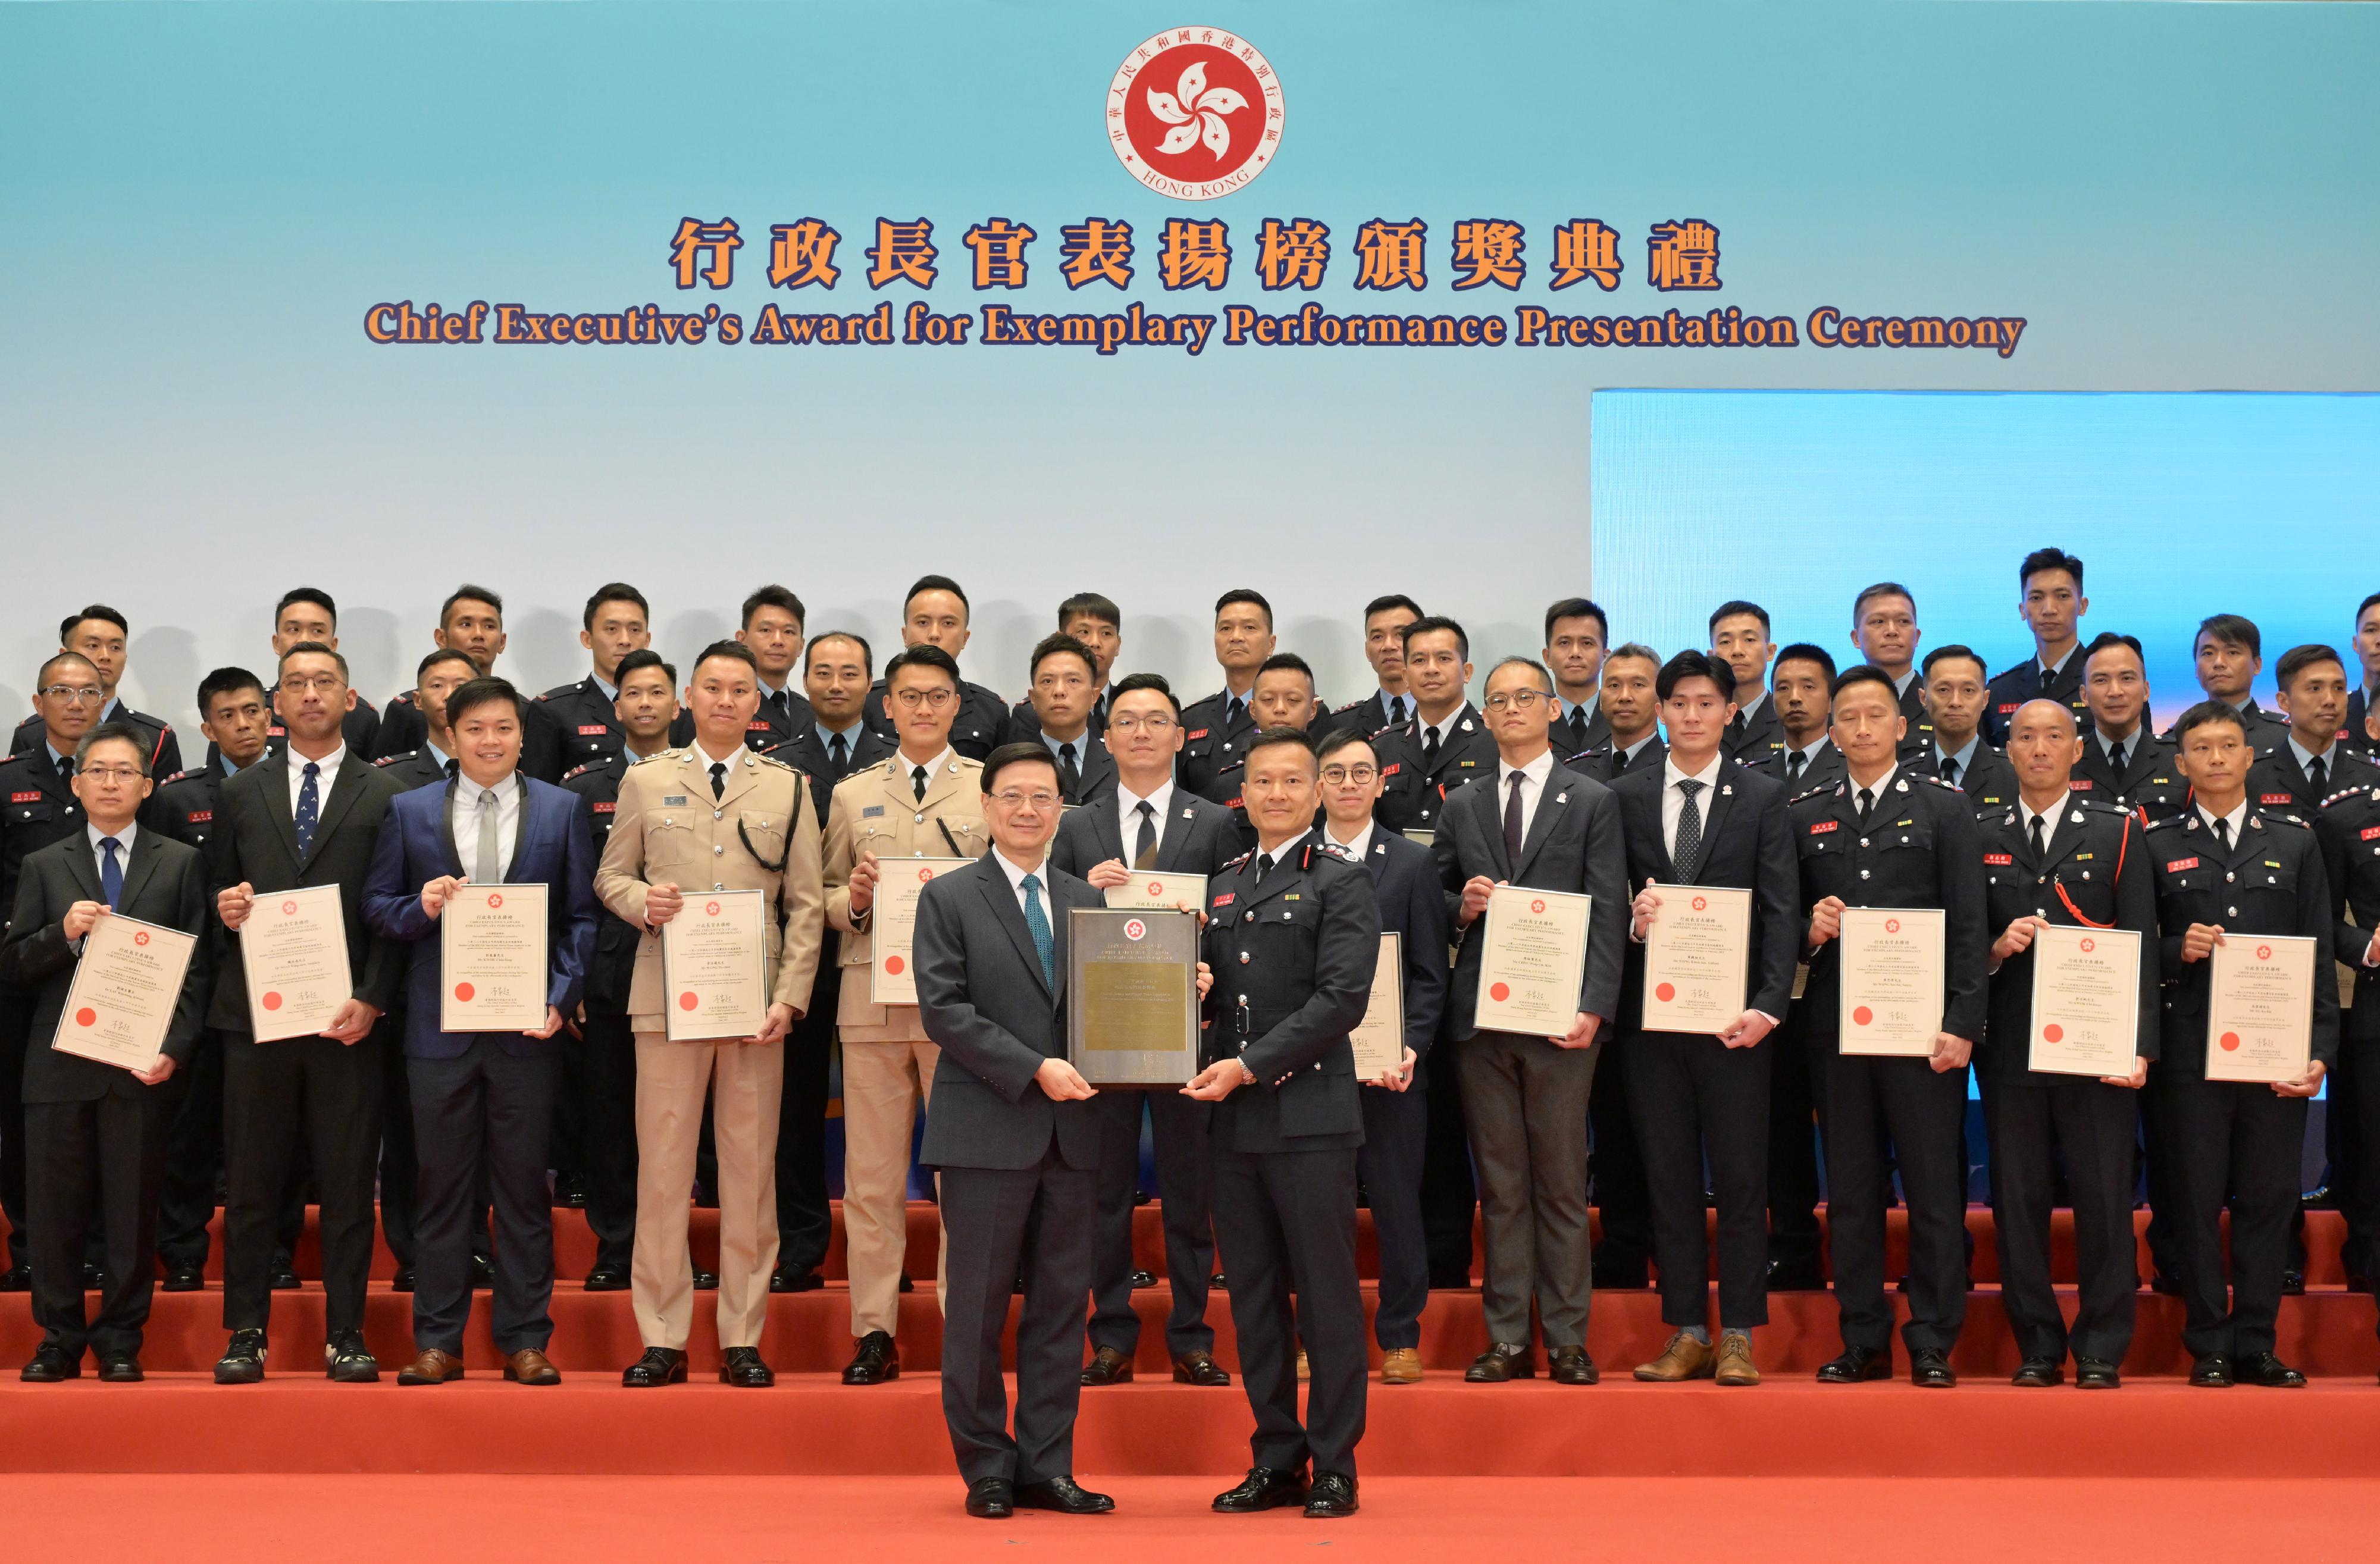 The Chief Executive, Mr John Lee, presented commendation certificates to the Hong Kong Special Administrative Region (HKSAR) search and rescue team deployed to quake-stricken areas of Türkiye in 2023 at the Chief Executive's Award for Exemplary Performance Presentation Ceremony today (July 13). Photo shows Mr Lee (front row, left) presenting a commendation certificate to the Commander of the HKSAR search and rescue team, Mr Yiu Men-yeung (front row, right).